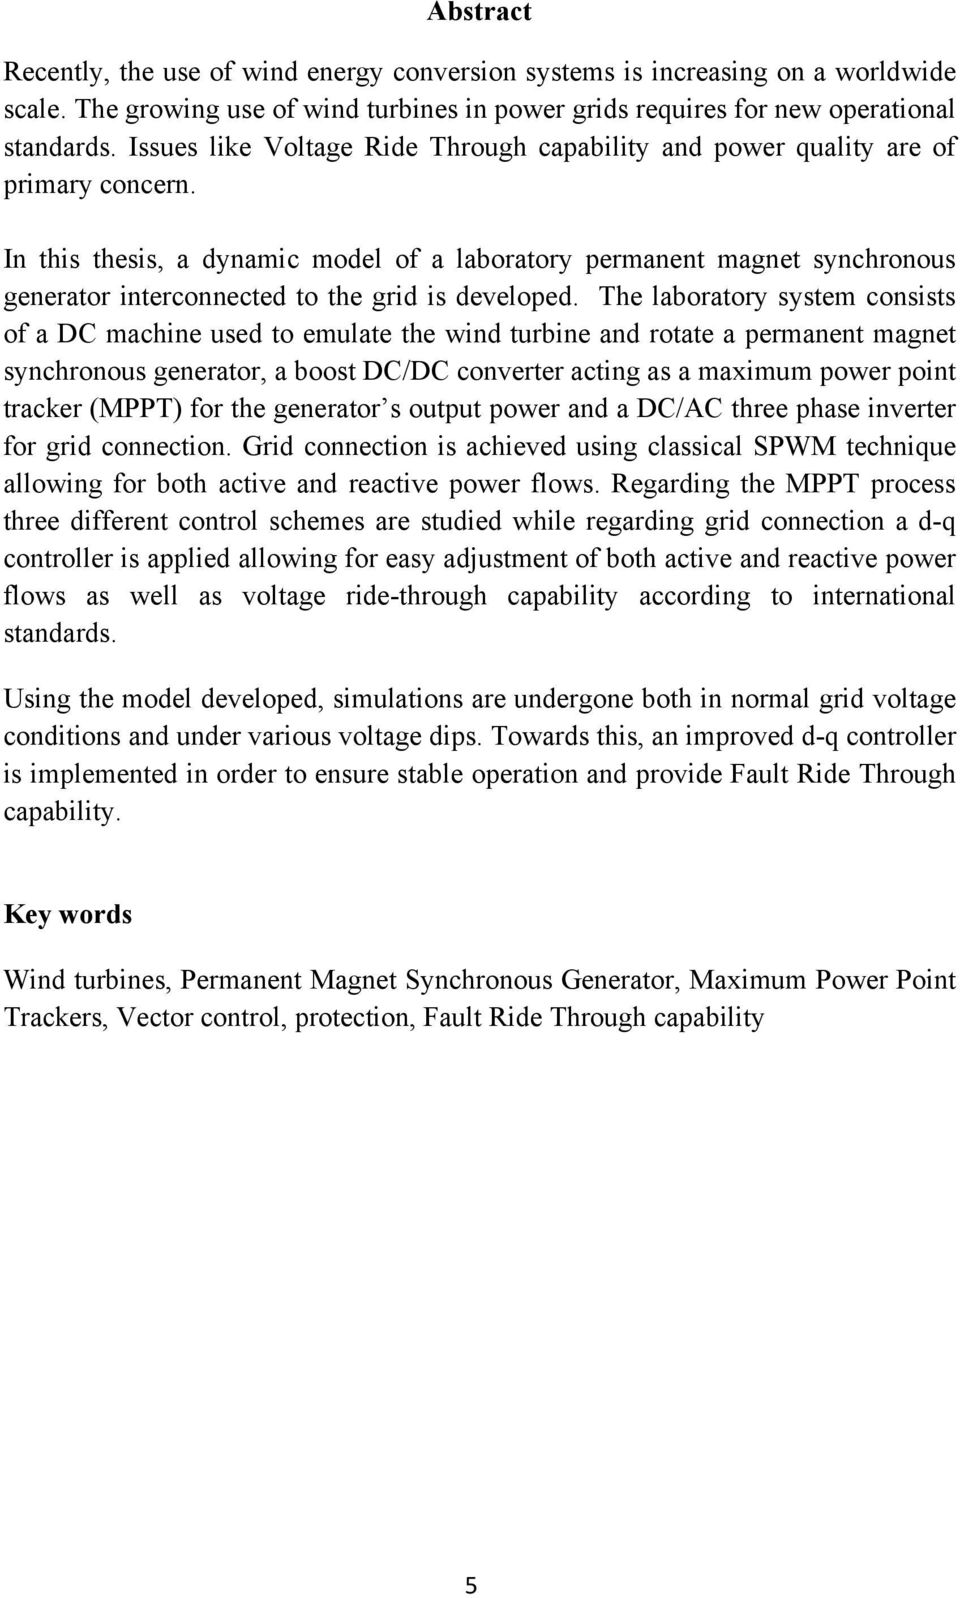 In this thesis, a dynamic model of a laboratory permanent magnet synchronous generator interconnected to the grid is developed.